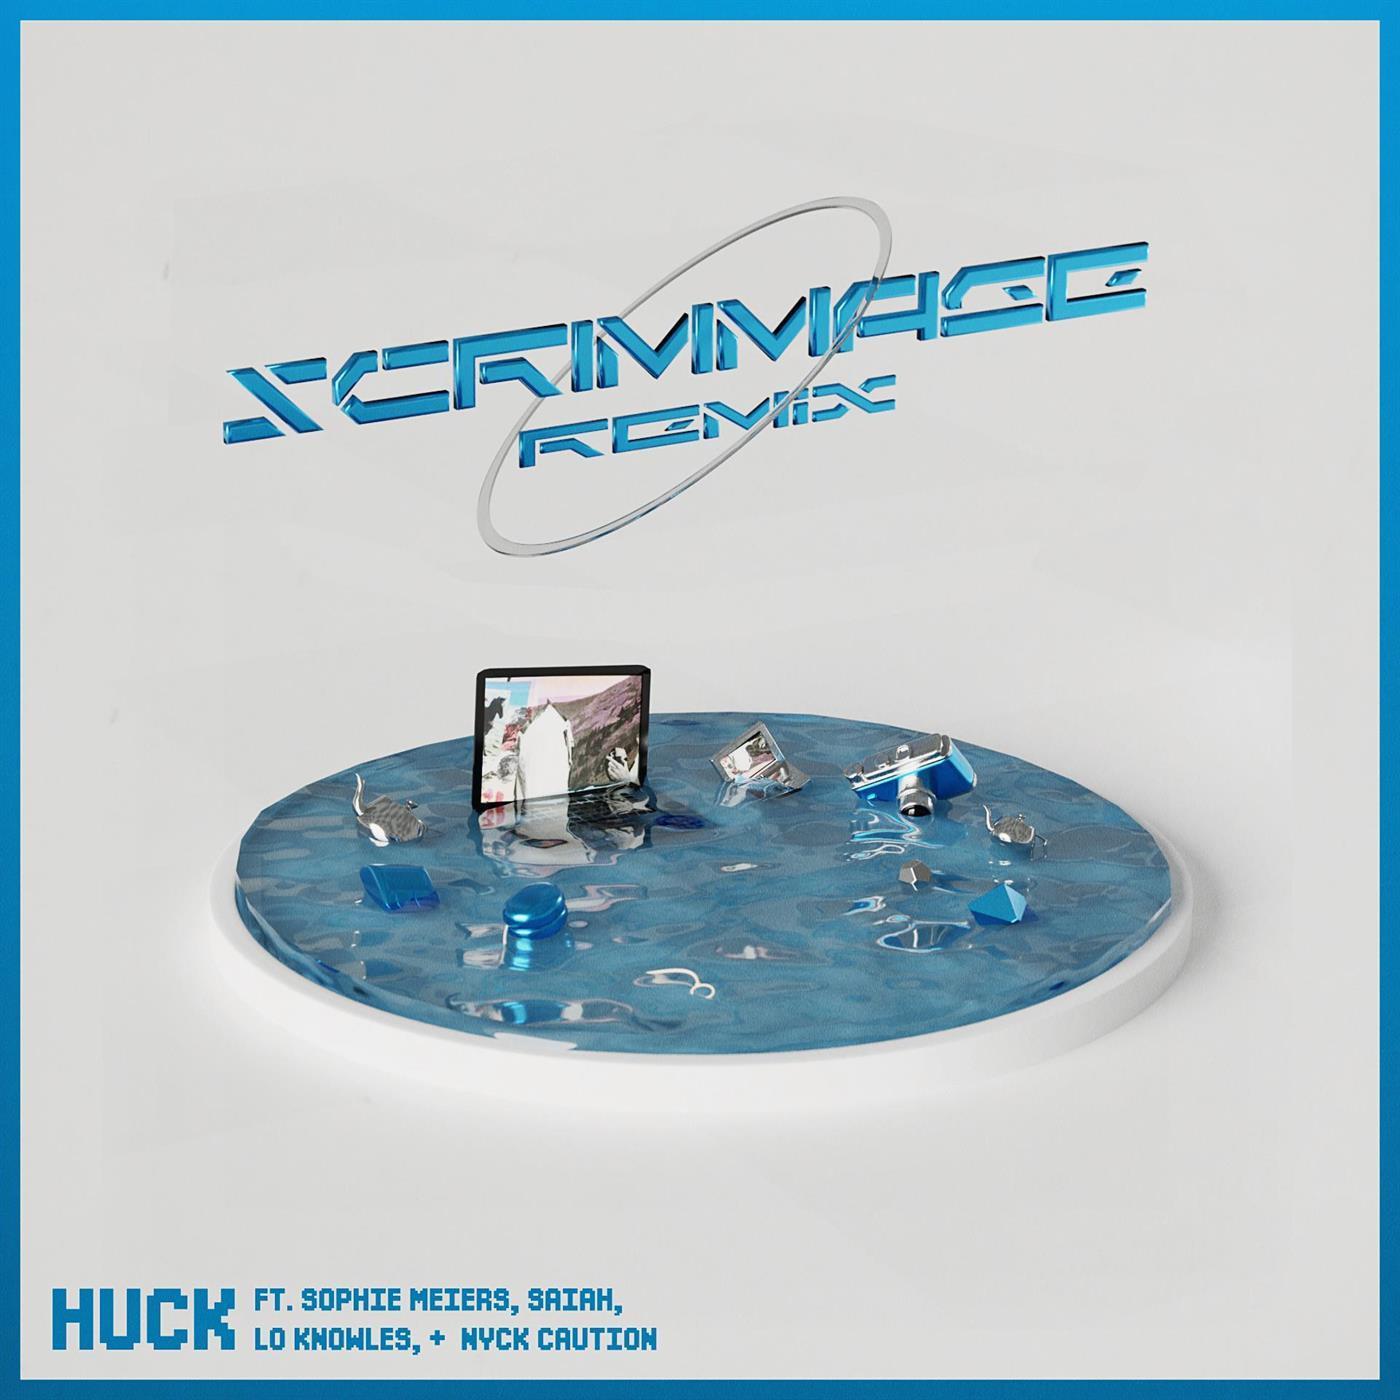 HUCK - Scrimmage (Remix) (feat. Nyck Caution & Sophie Meiers)